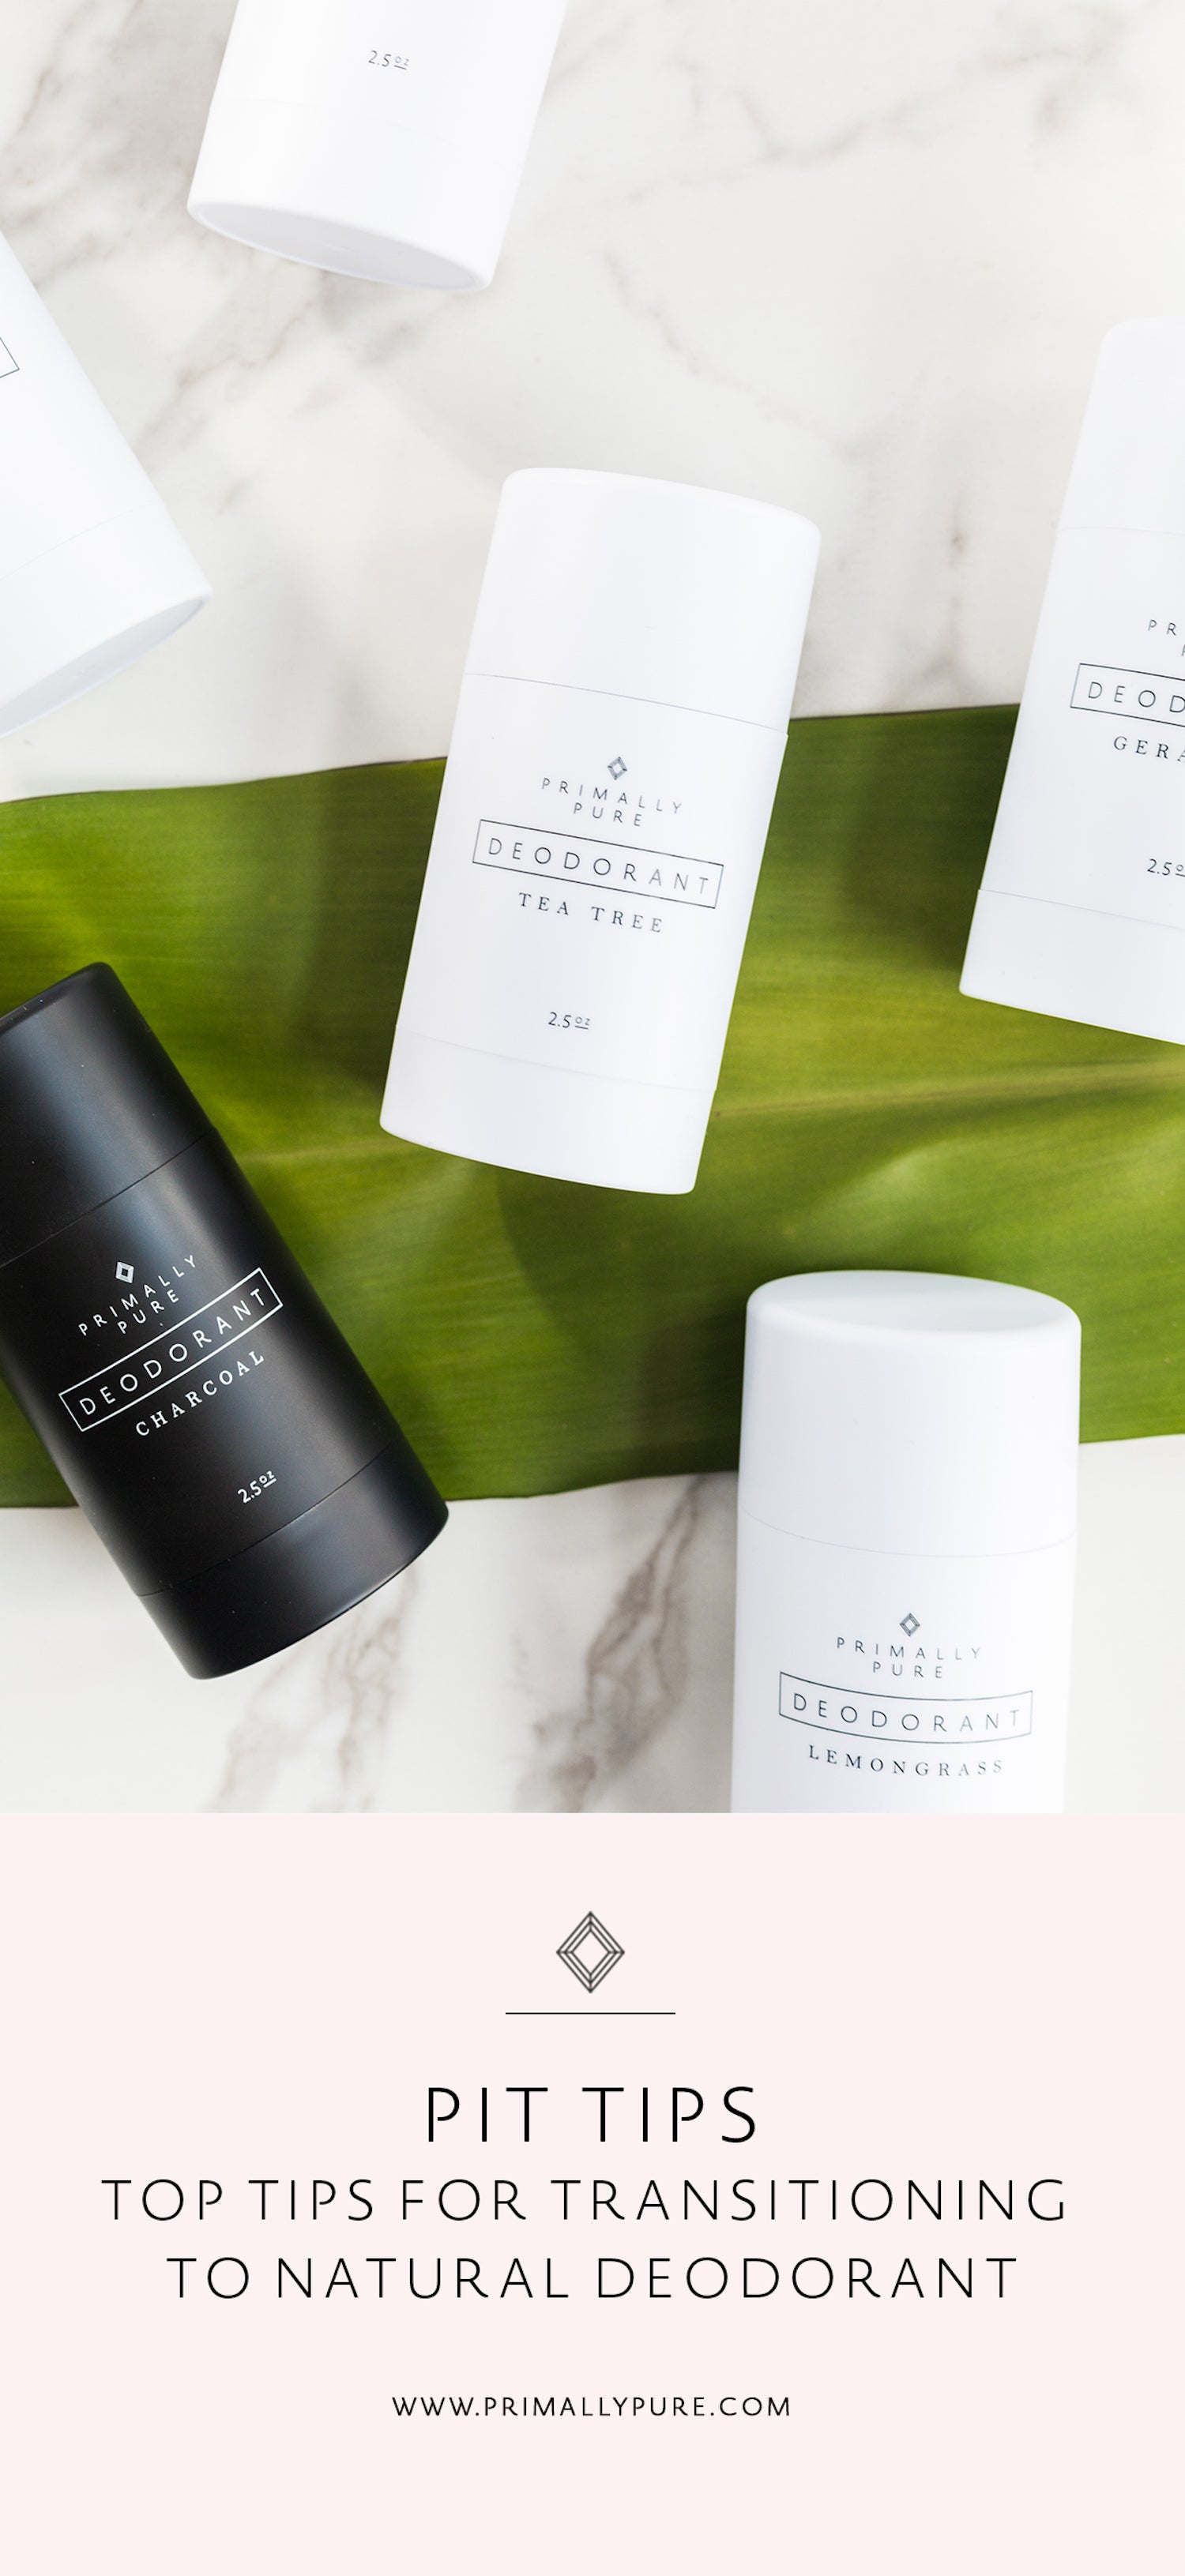 TOP PIT TIPS FOR TRANSITIONING TO NATURAL DEODORANT